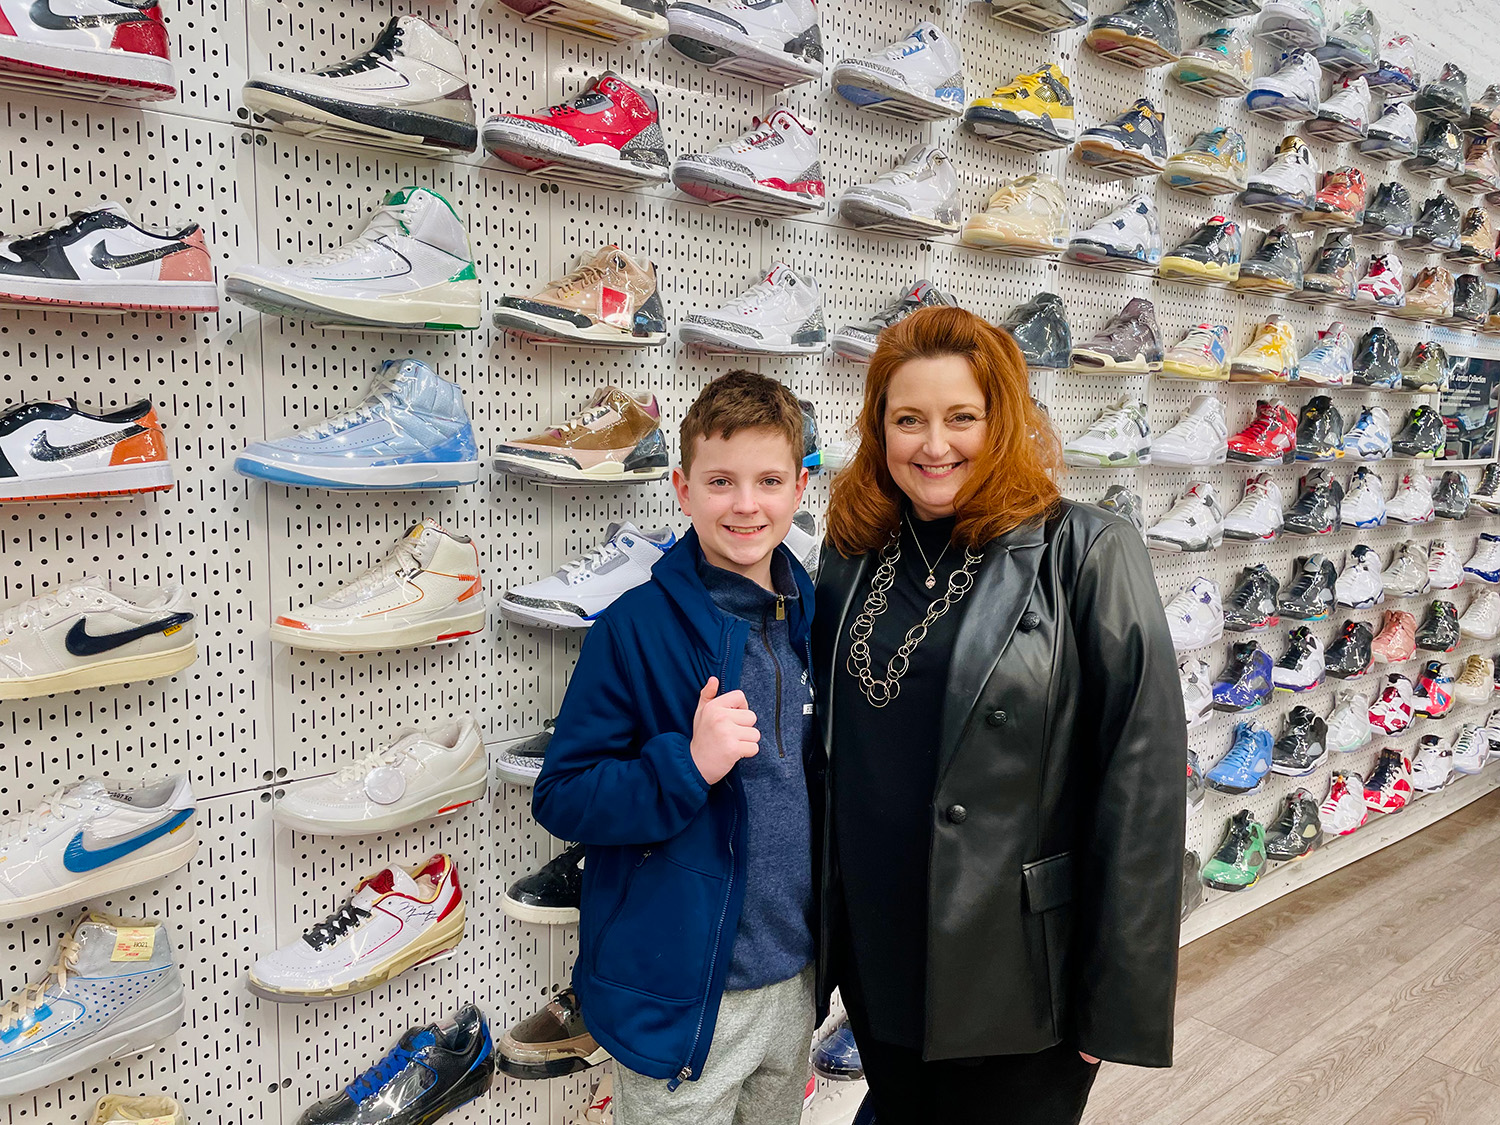 Stephanie Reitz and son Brady at the “Sneaker Shopping” show taping in NYC.